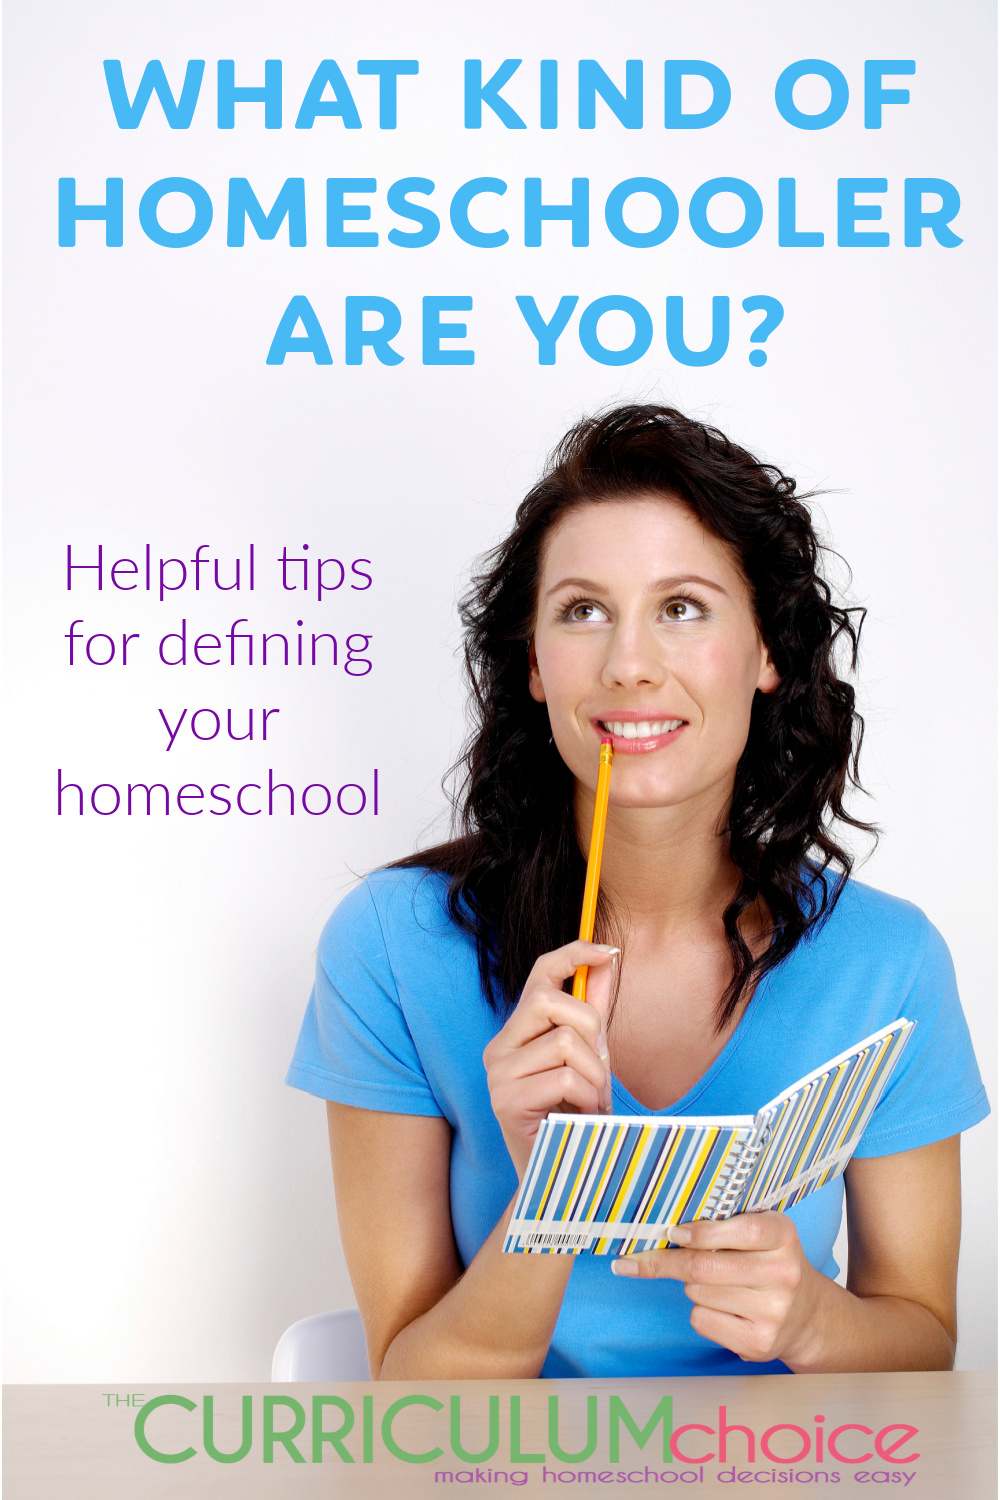 What Kind of Homeschooler Are You? Helpful tips for defining your homeschool and choosing curriculum that suits your needs.